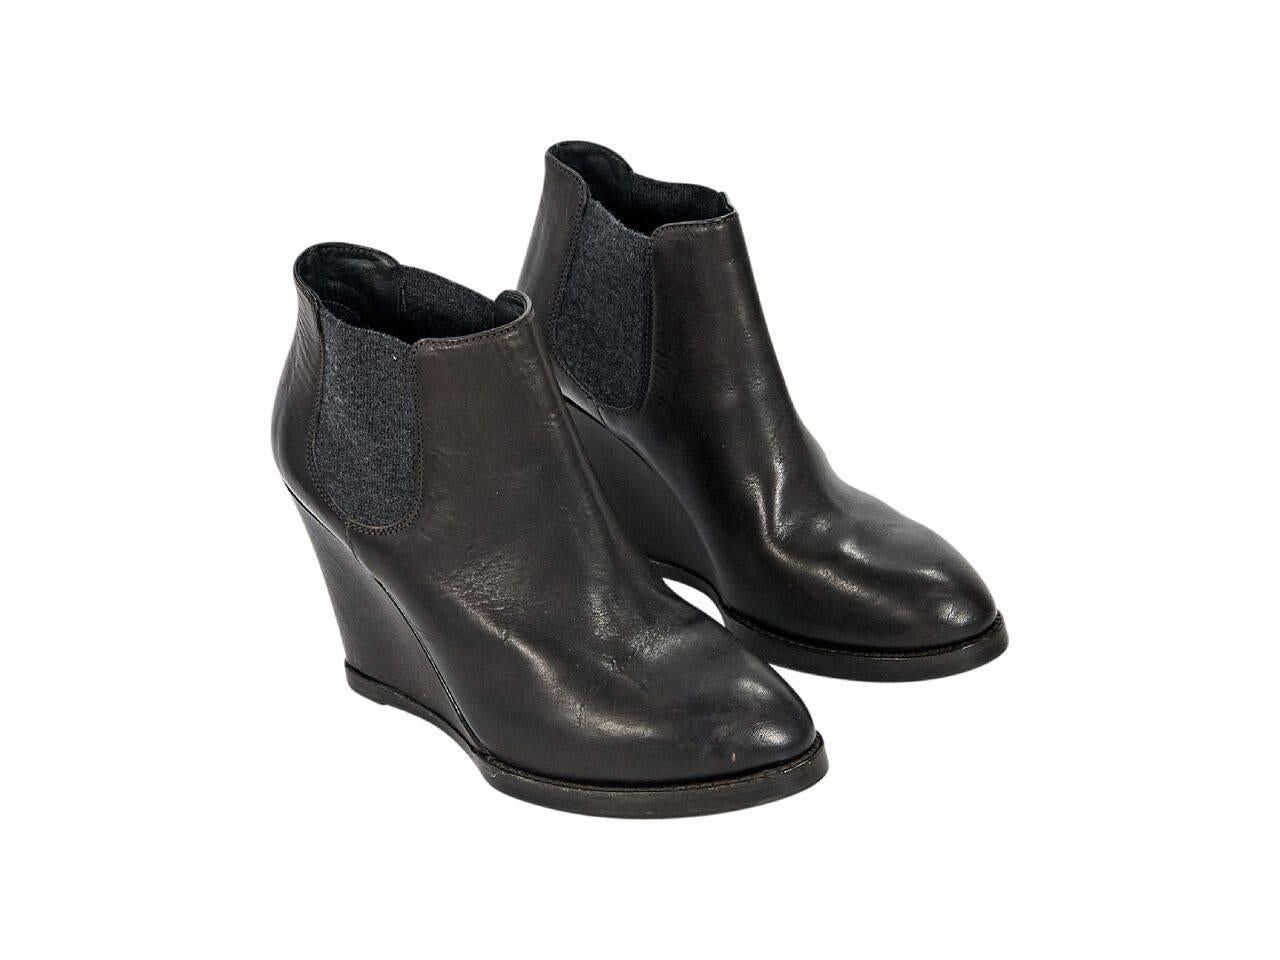 Product details:  Brown leather wedge Chelsea boots by Brunello Cucinelli.  Elasticized side panels for an easy fit.  Round almond toe.  Pull-on style. 
Condition: Pre-owned. Very good.
Est. Retail $ 1,705.00